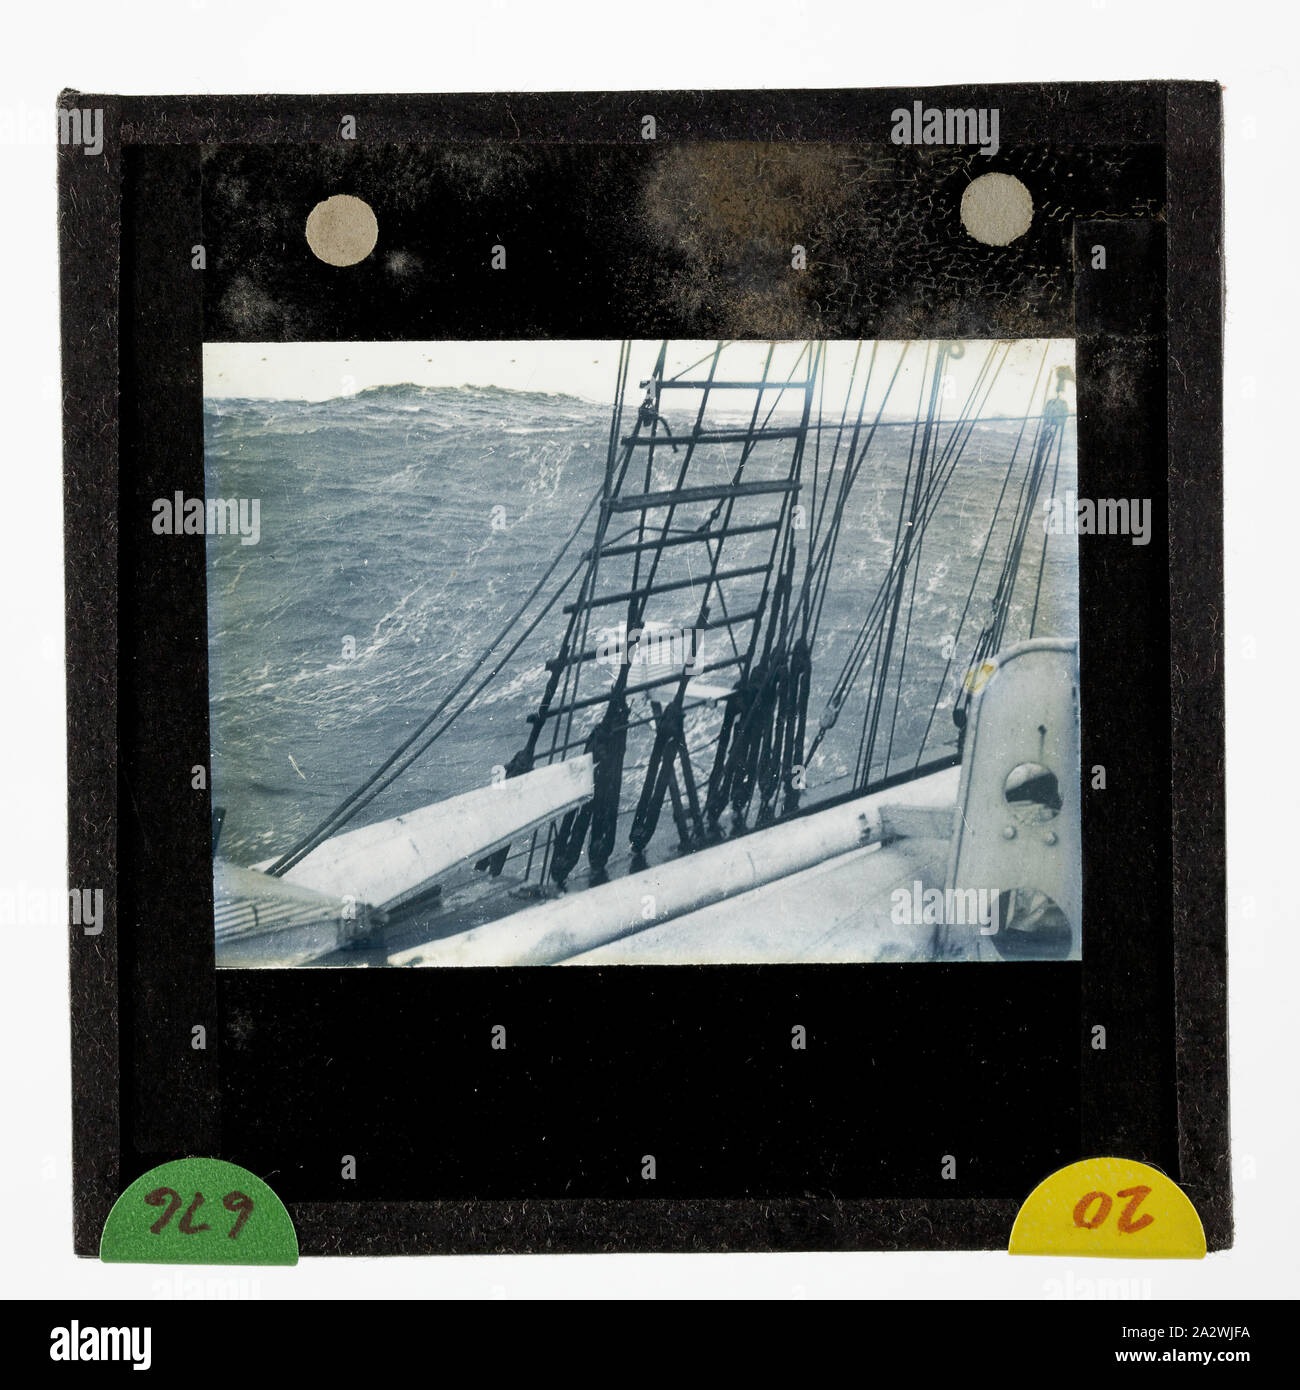 Lantern Slide - Ship Discovery on the Return Journey to Hobart, BANZARE Voyage 2, Antarctica, 1930-1931, Lantern slide of the Discovery in an ocean swell during the return trip from the Antarctic to Hobart. One of 328 images in various formats including artworks, photographs, glass negatives and lantern slides Stock Photo